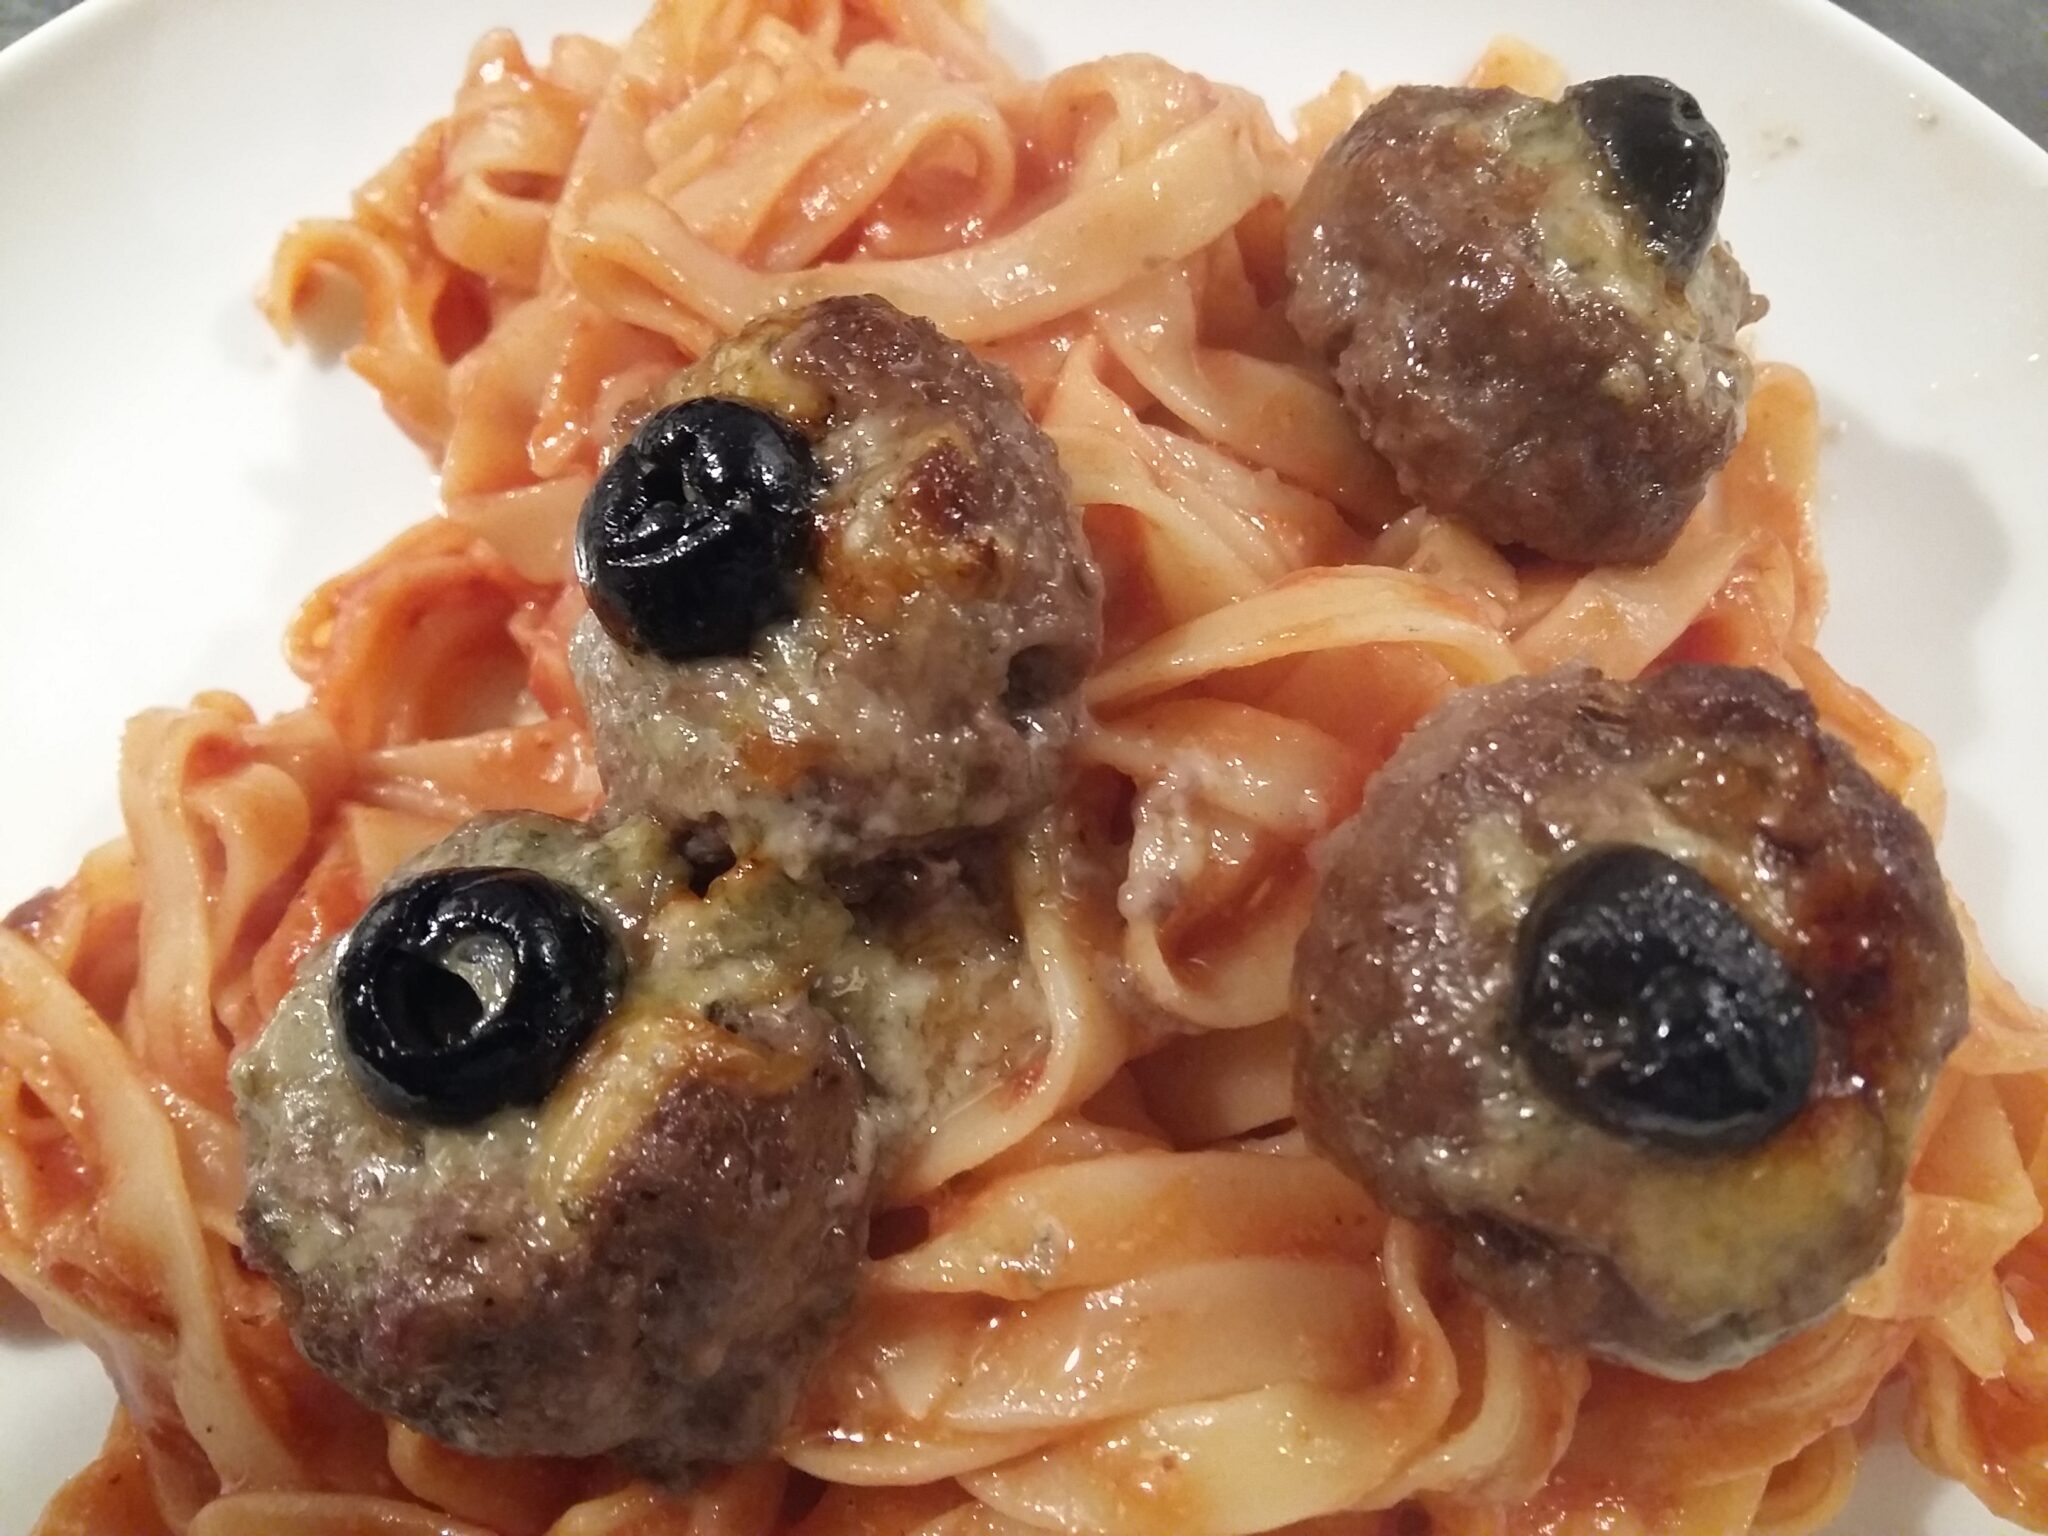 Eyebal meatballs and bloody tapeworms